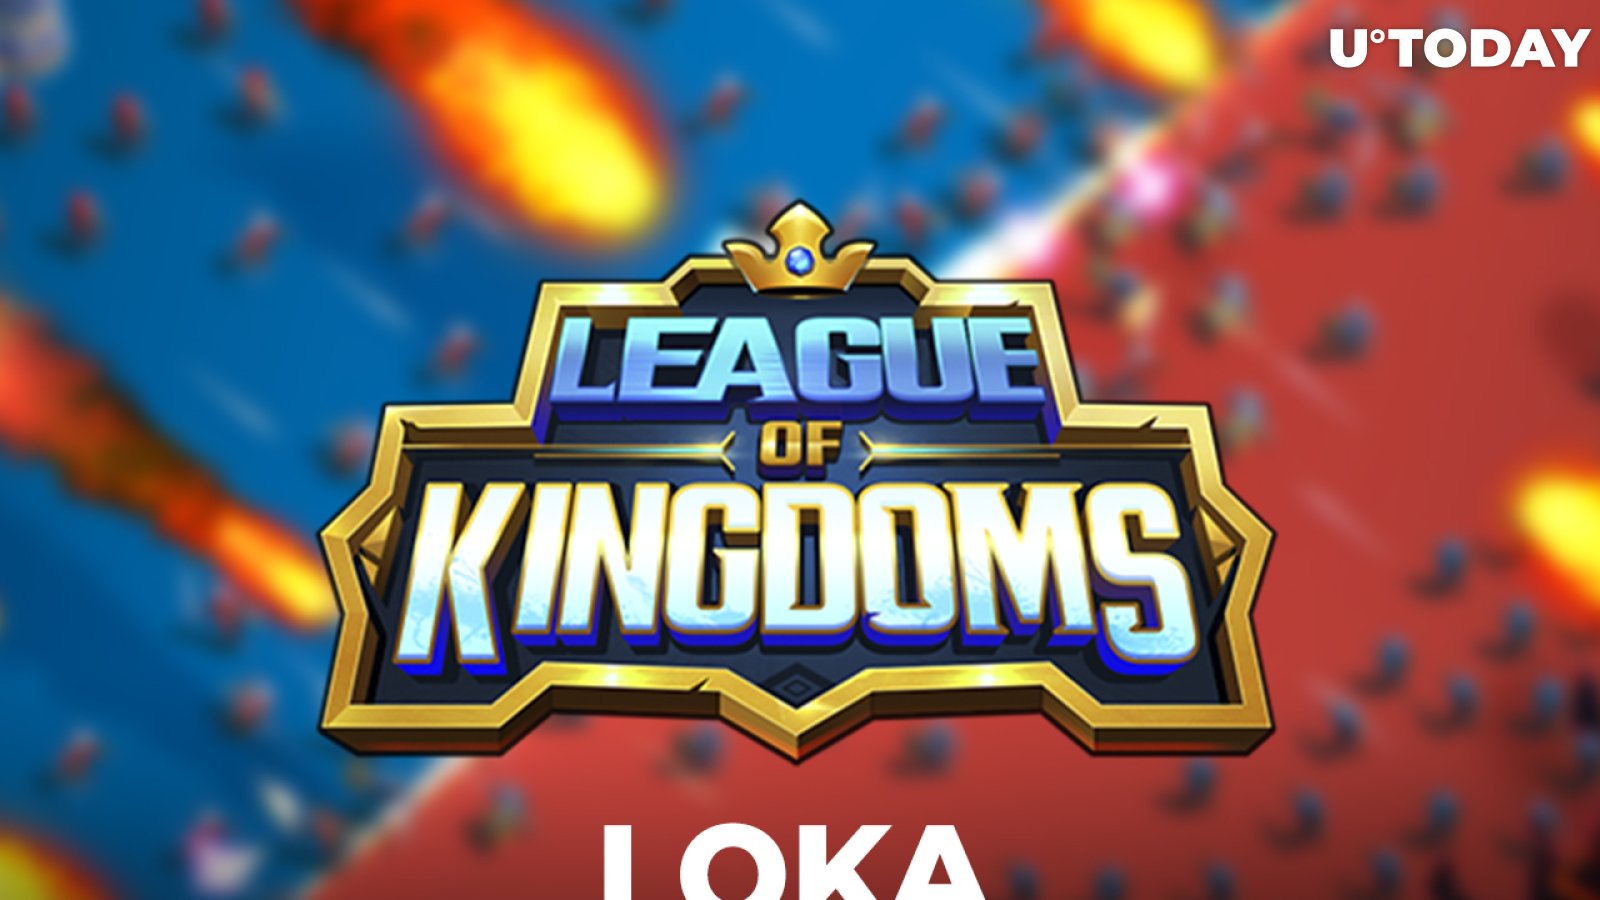 League of Kingdoms Play-to-Earn Introduces LOKA Token: Details